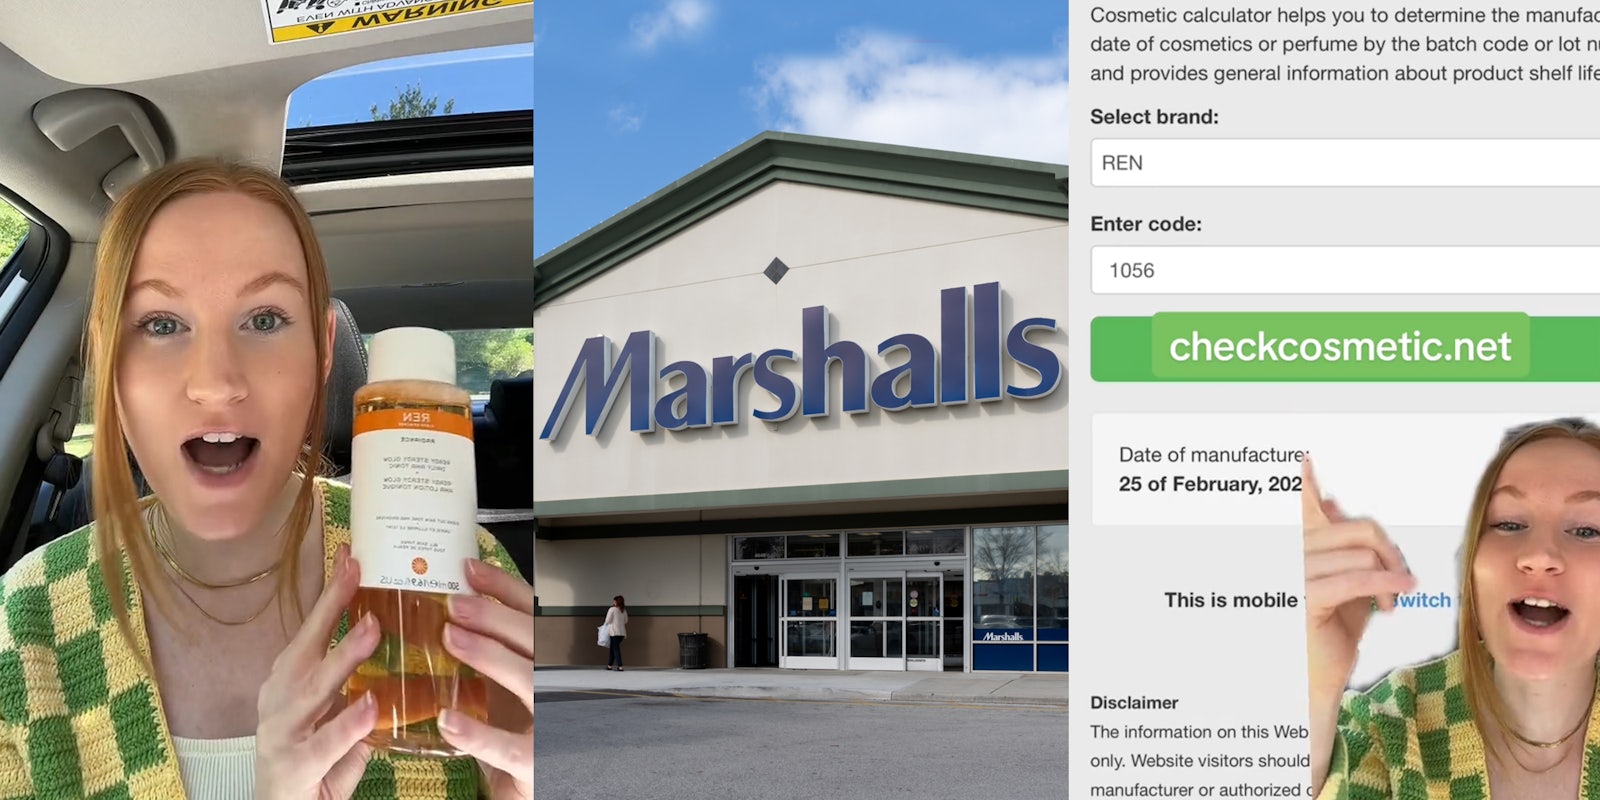 Marshalls customer speaking in car holding skincare product (l) Marshalls building with sign (c) Marshalls customer greenscreen TikTok over cosmetic calculator with caption 'checkcosmetic.net' (r)